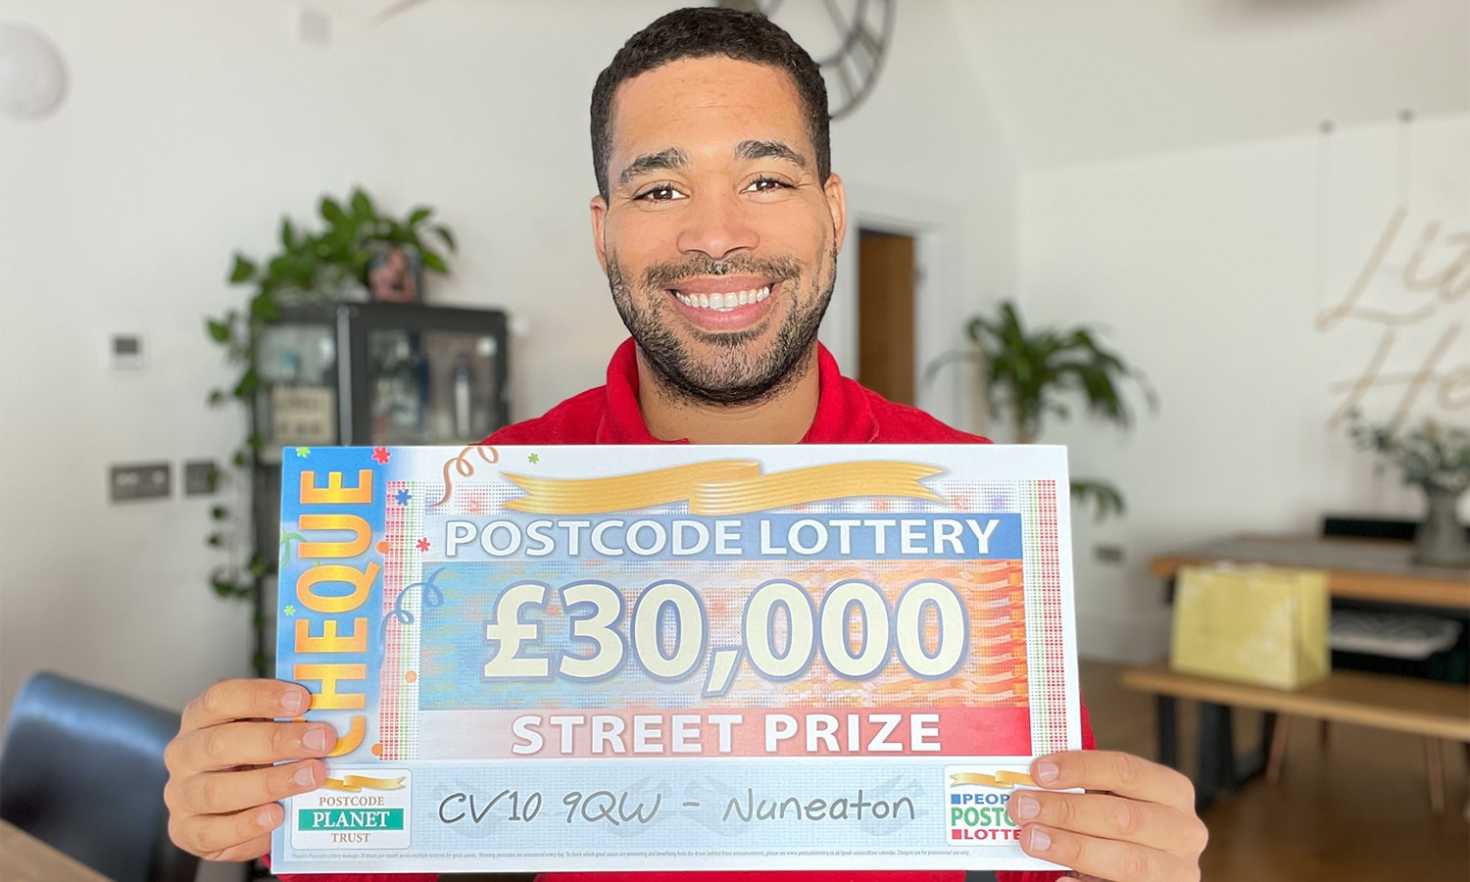 Danyl reveals today's £30,000 winning postcode and prizes